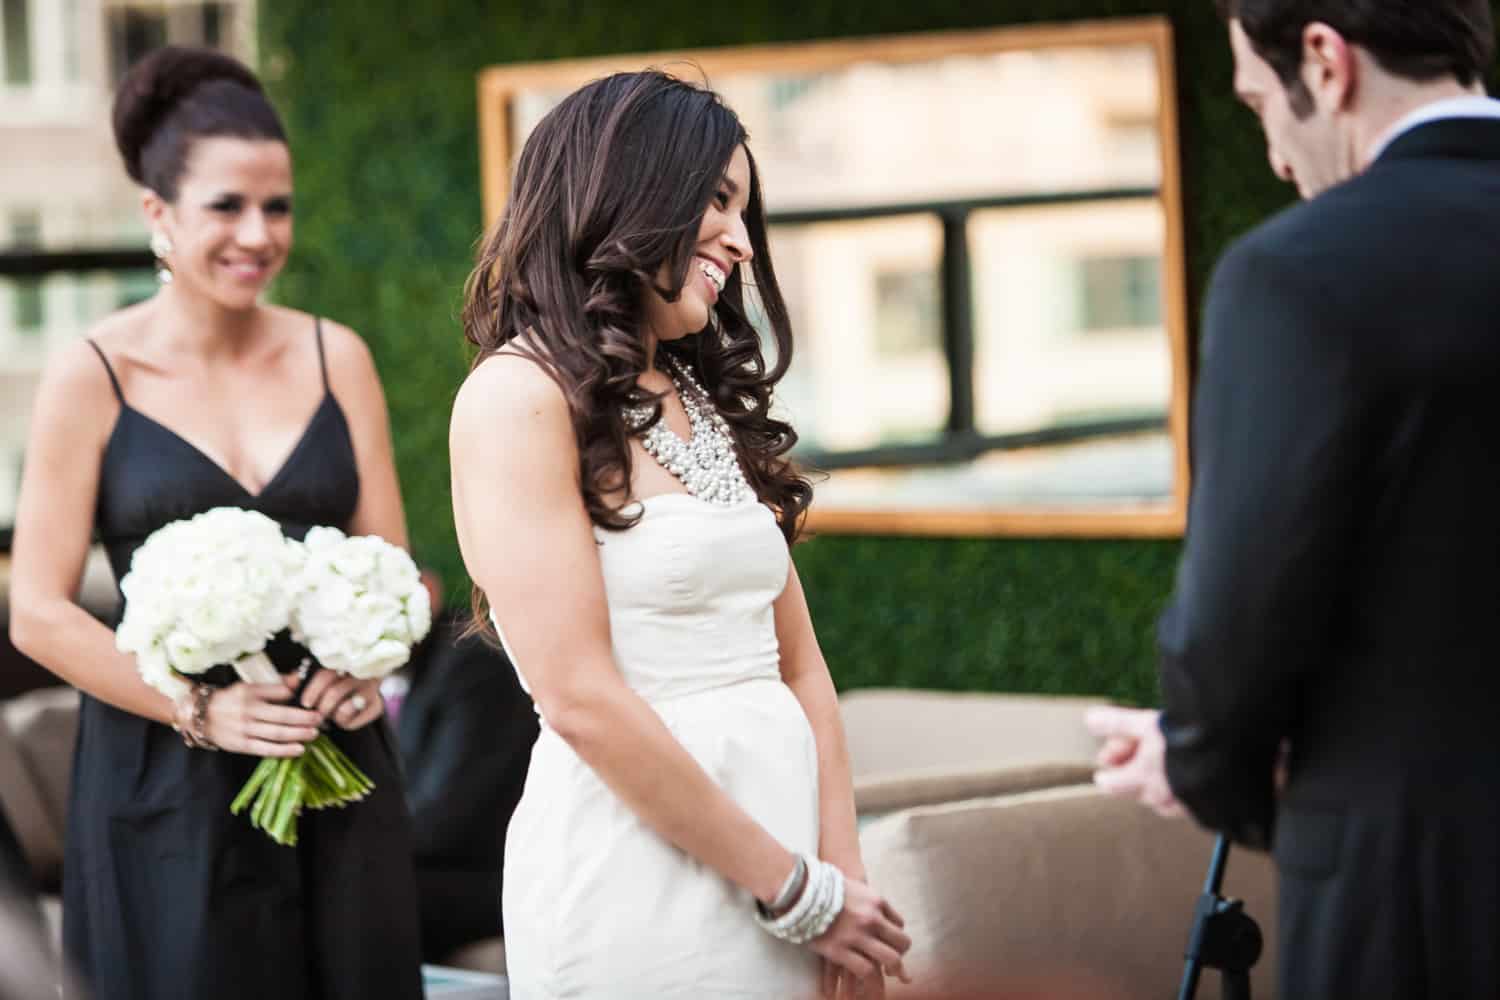 Bride smiling during ceremony at an Empire Hotel rooftop wedding